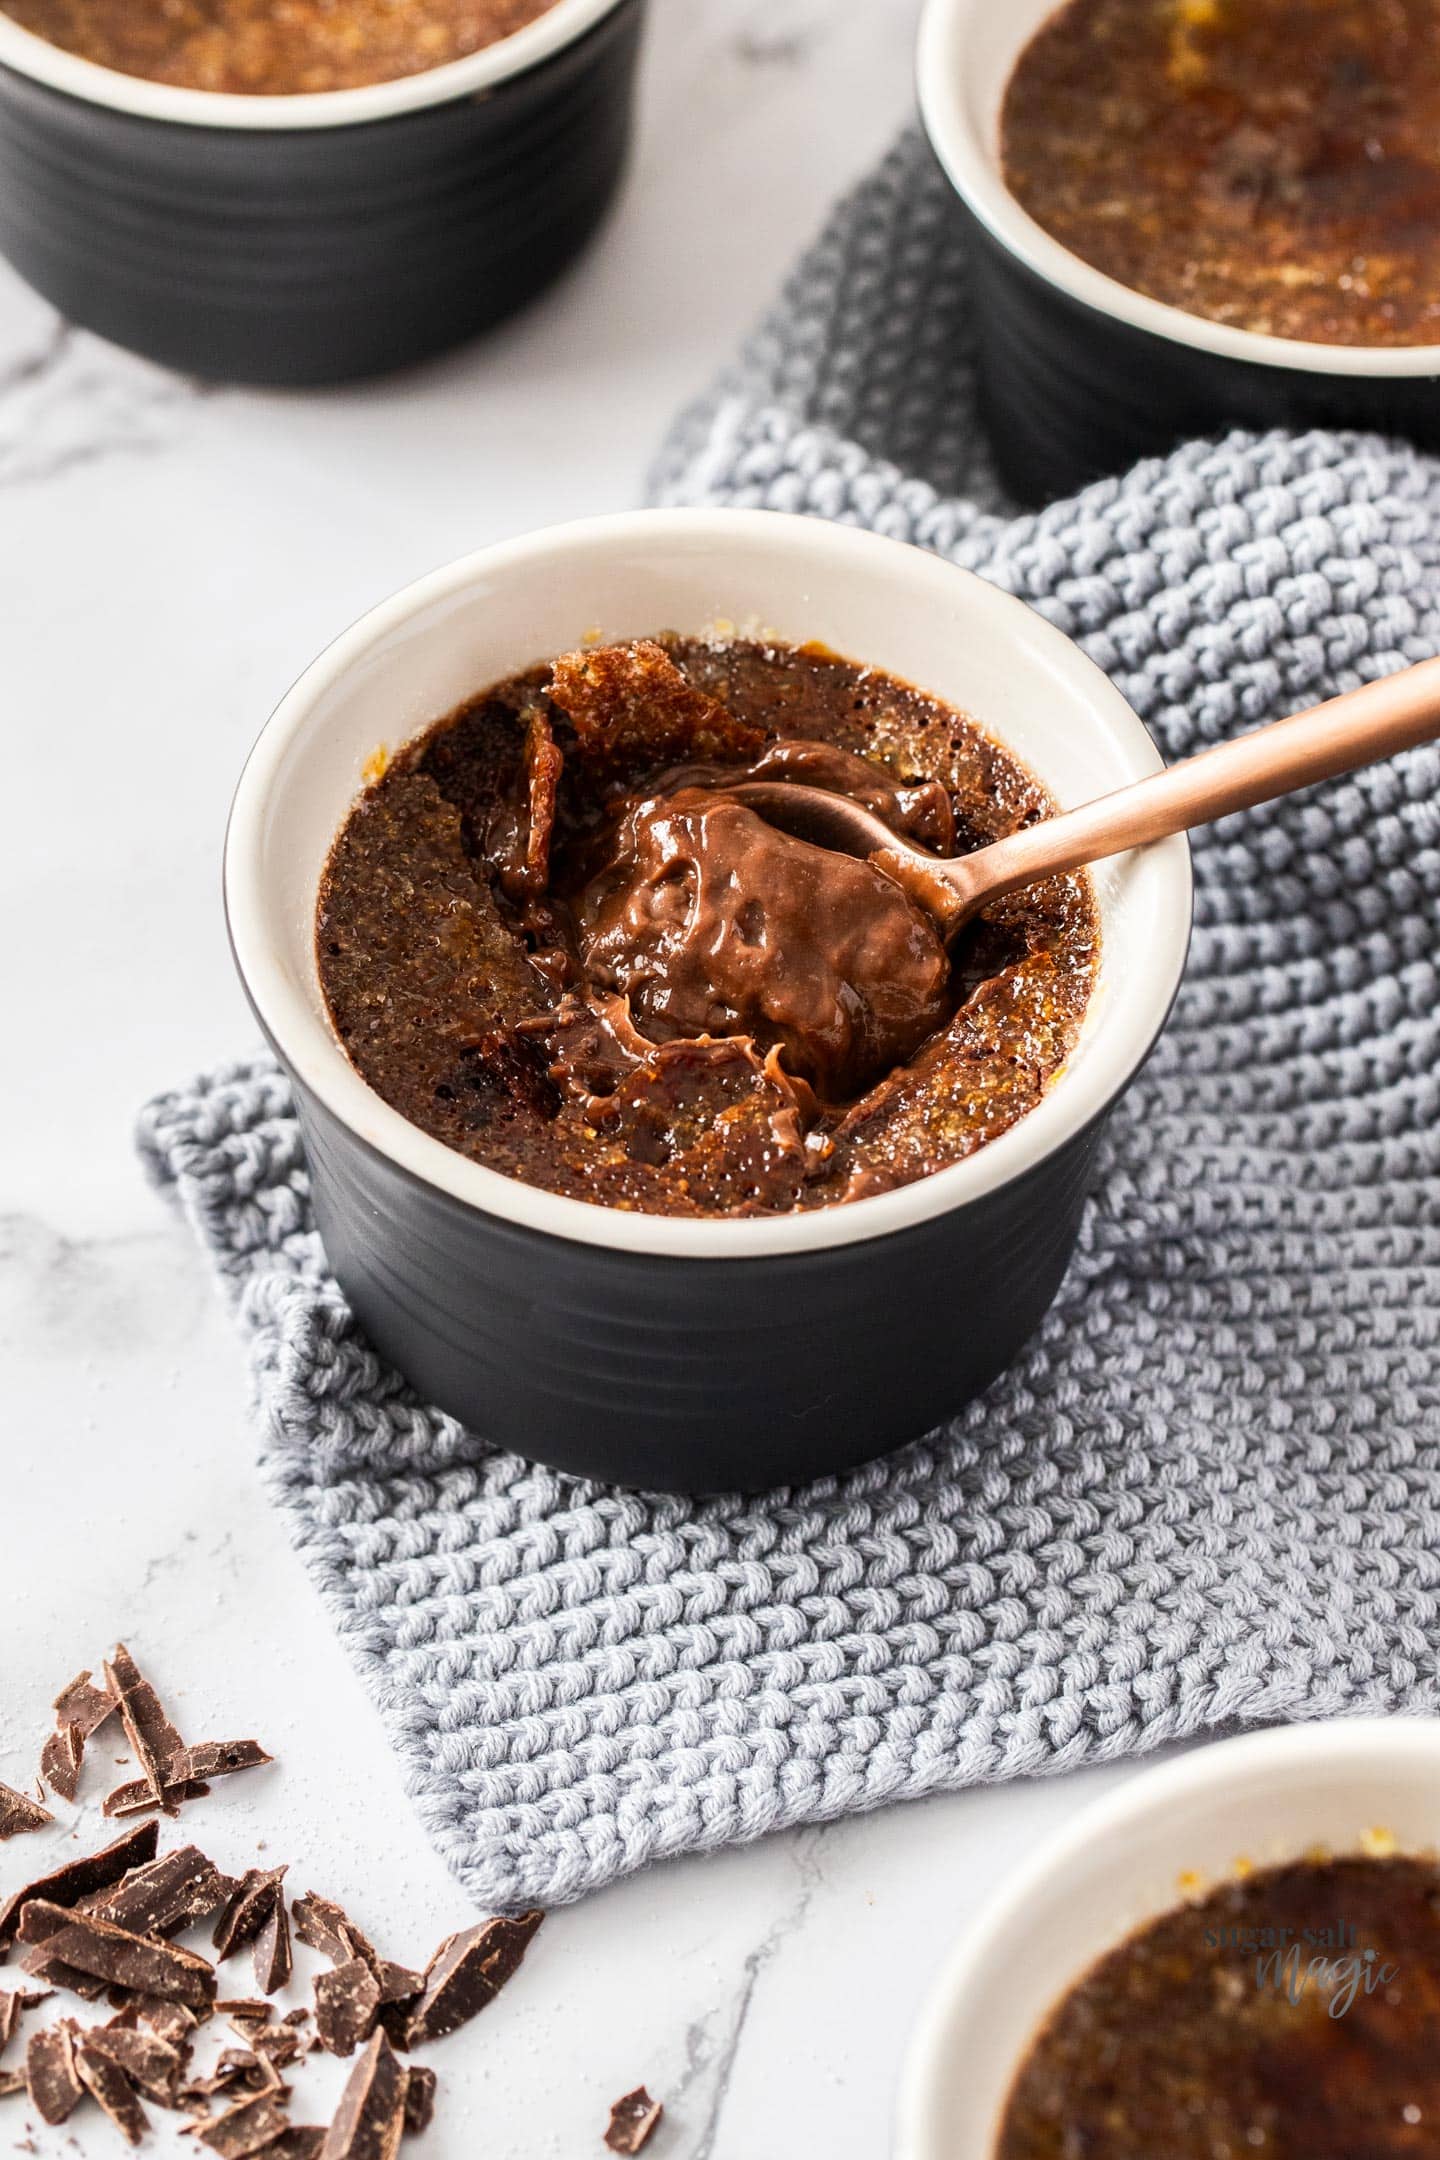 A spoon digging into chocolate creme brulee.